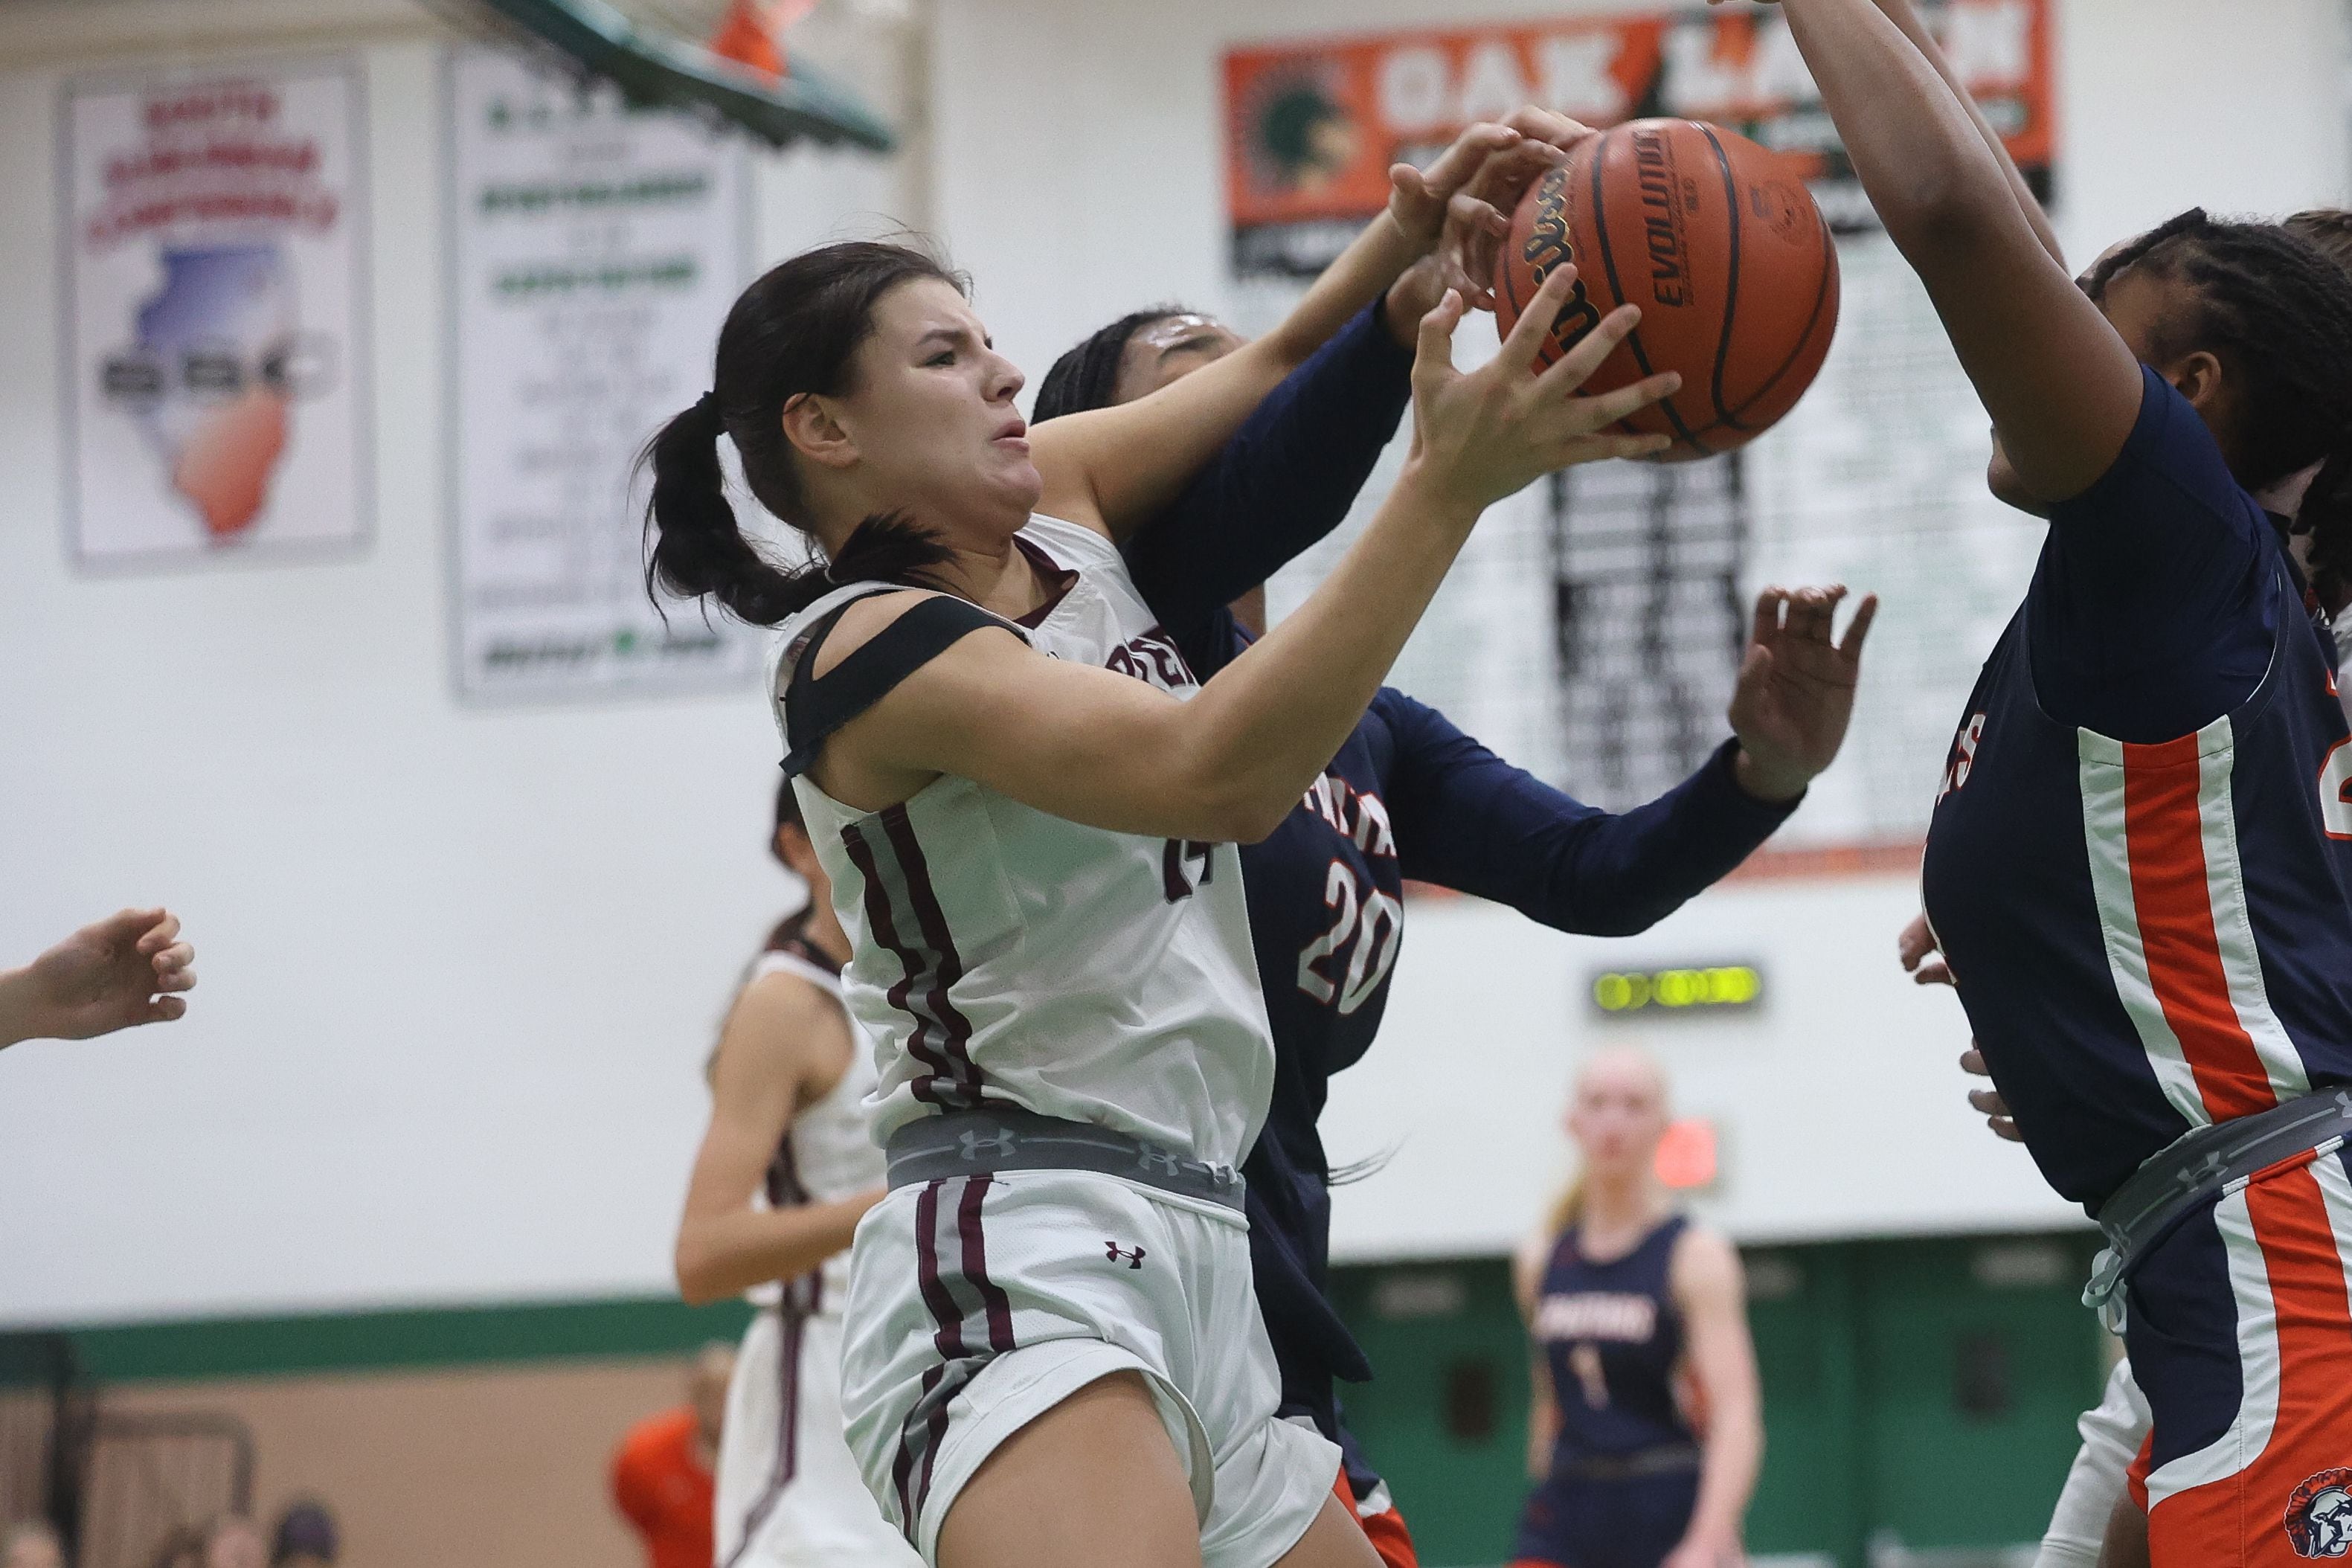 Lockport’s Veronica Bafia battles for the rebound against Romeoville in the Oak Lawn Holiday Tournament championship on Saturday, Dec.16th in Oak Lawn.